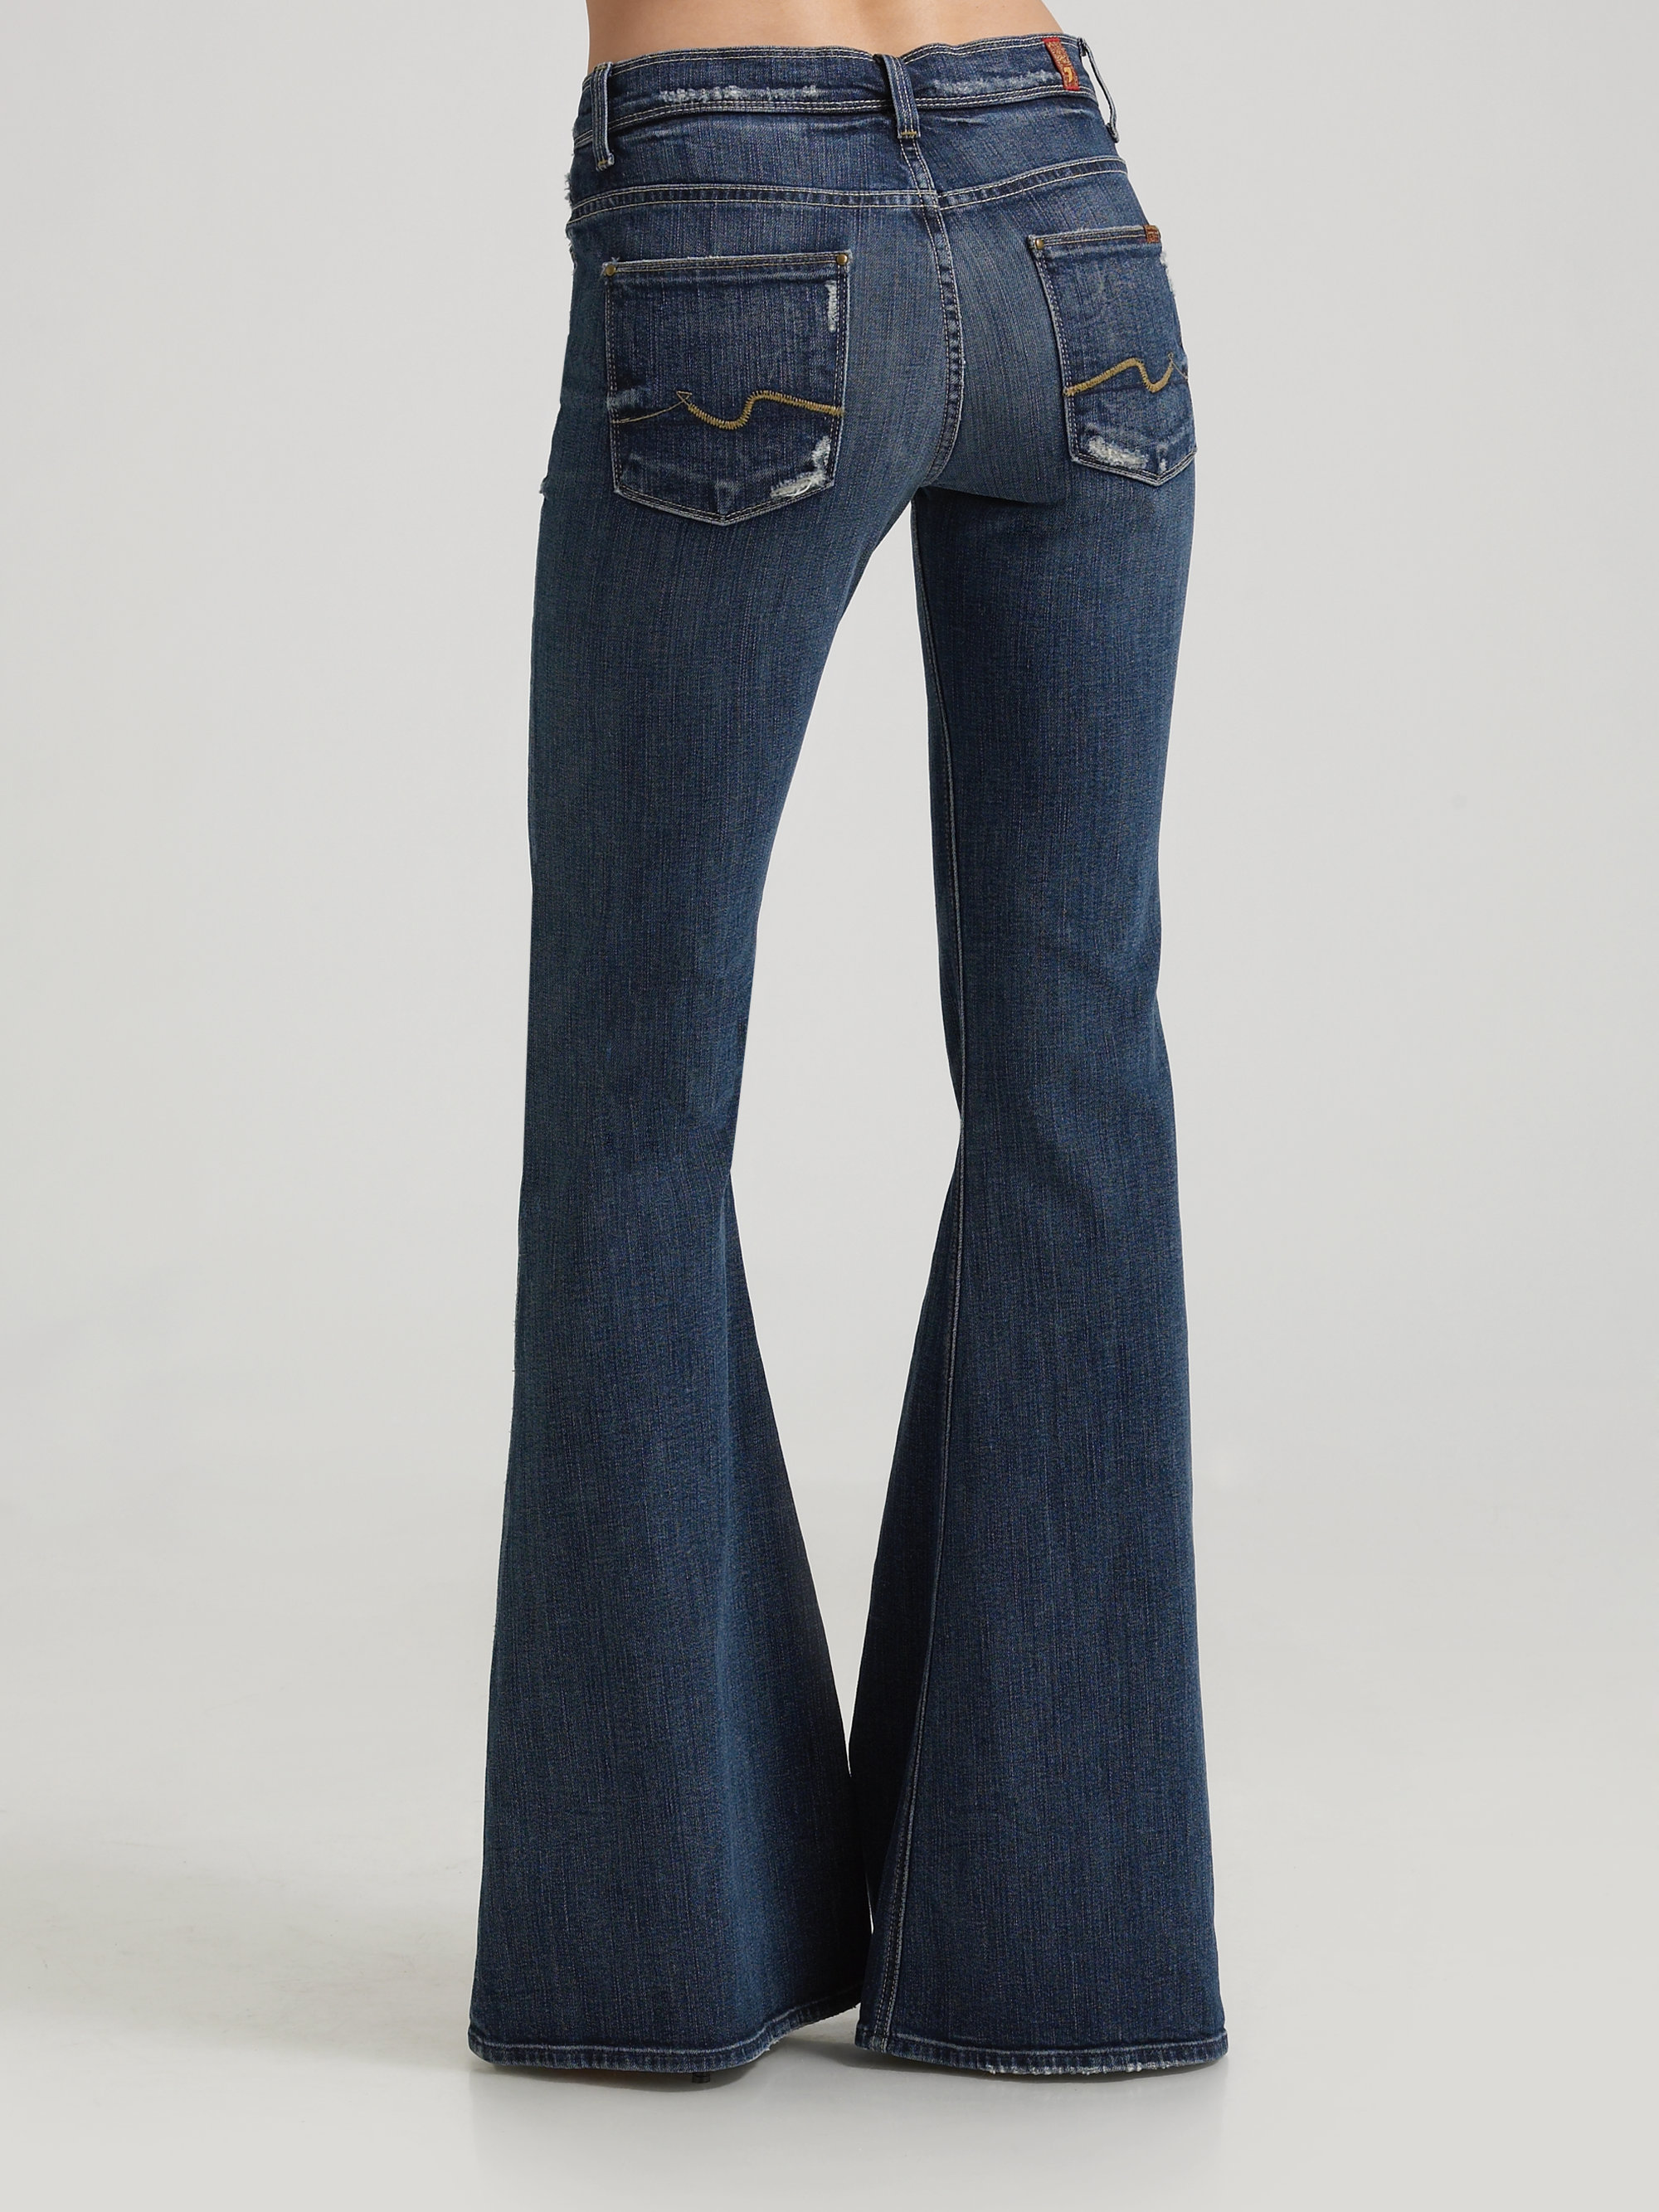 7 For All Mankind Organic Stretch Bell Bottom Jeans in Blue - Lyst